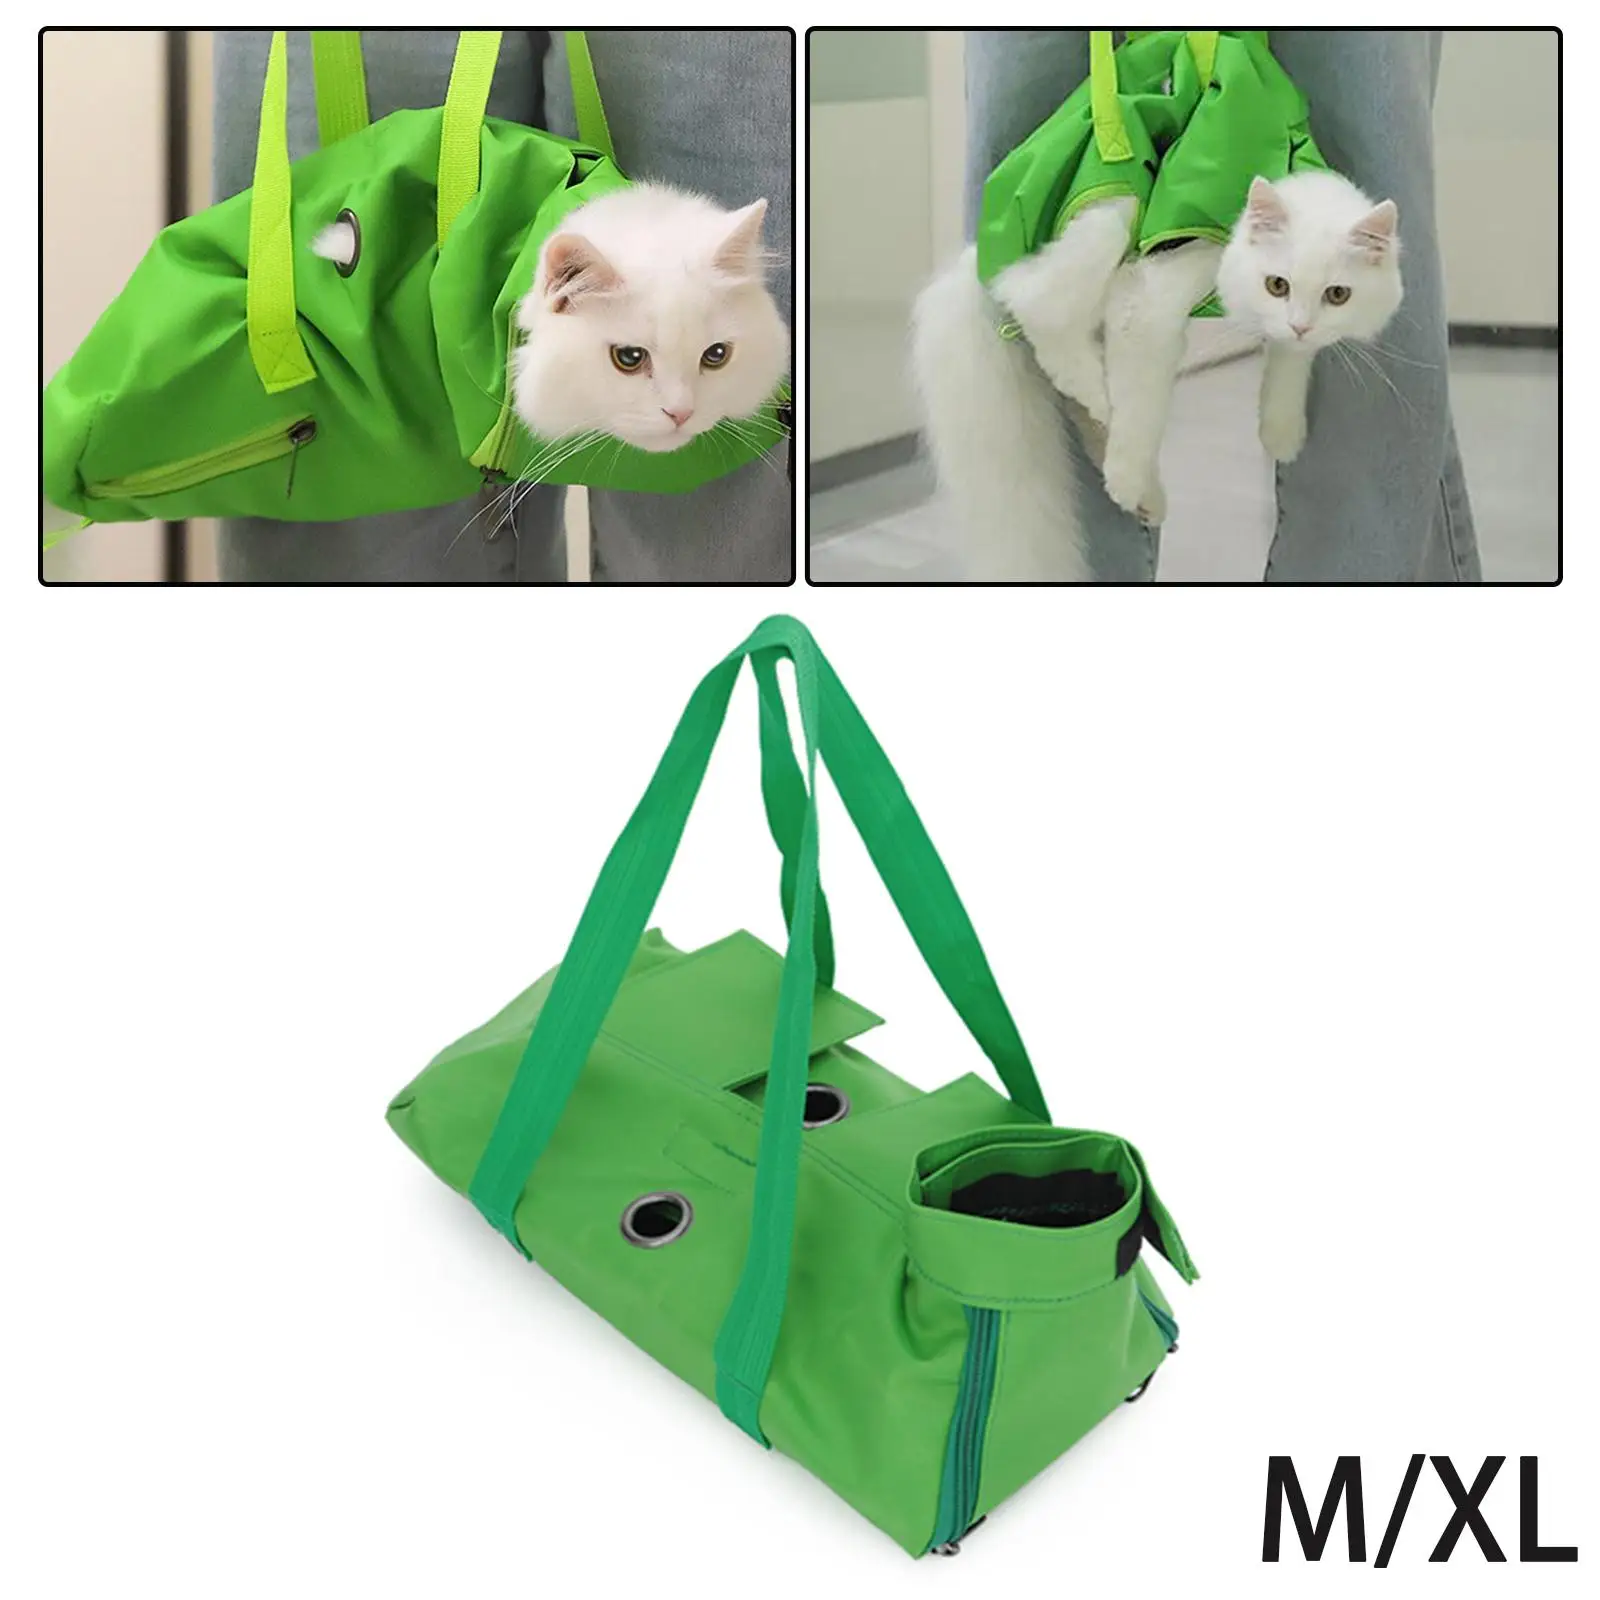 Cat Grooming Restraint Bag Adjustable Fixed Bag Breathable Carrying Bag for Claw Care Ear Cleaning Travel Kitten Puppy Pets